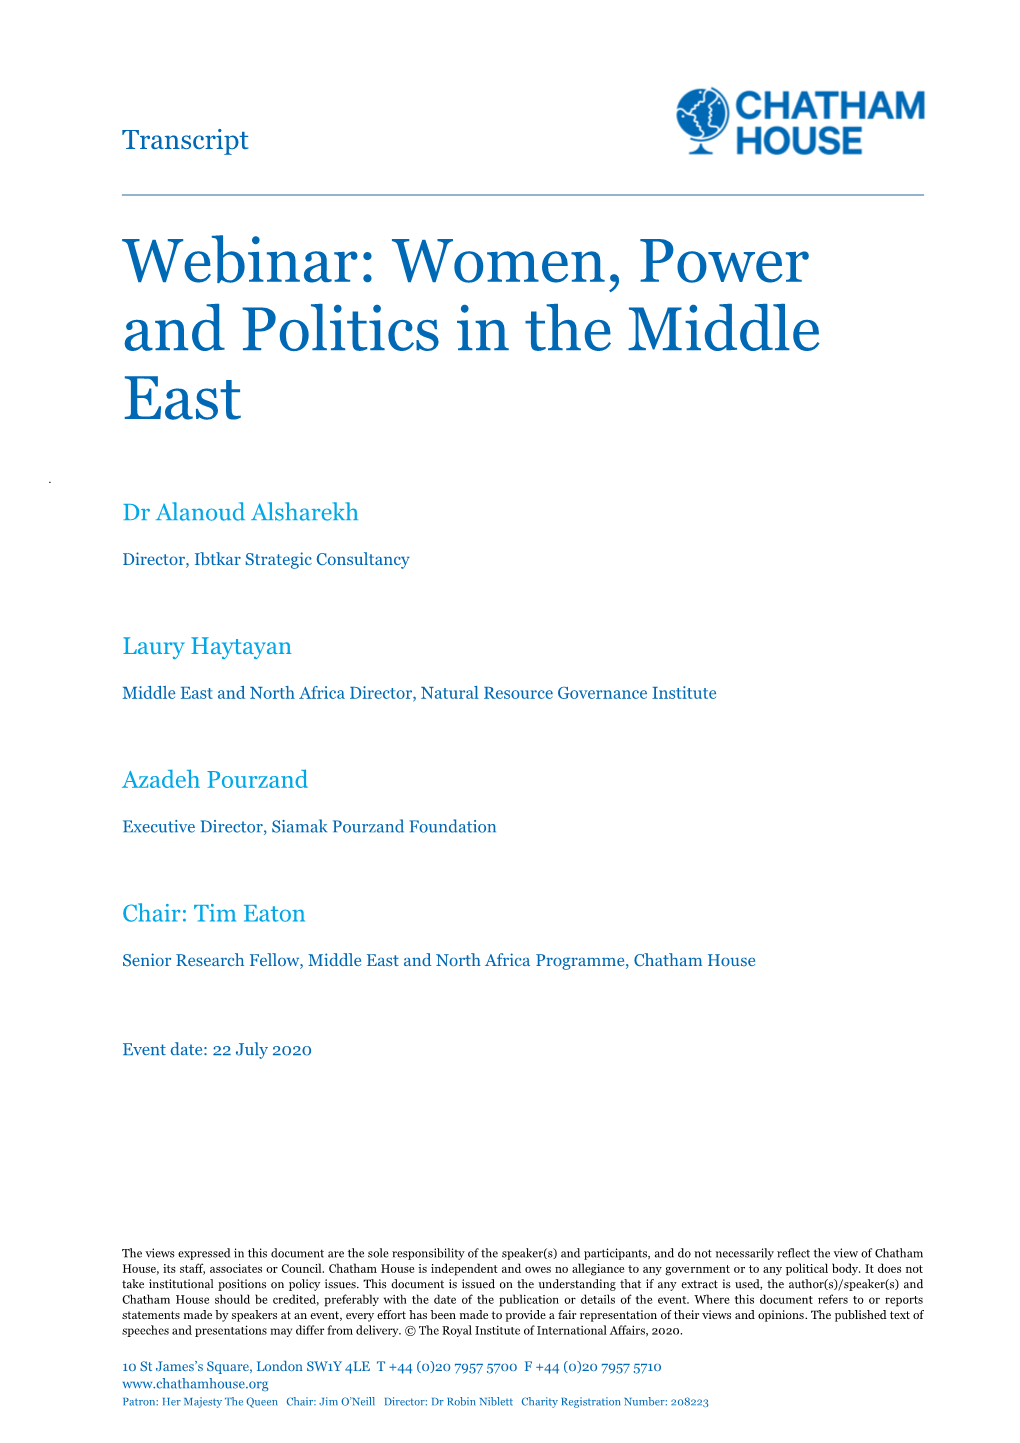 Webinar: Women, Power and Politics in the Middle East